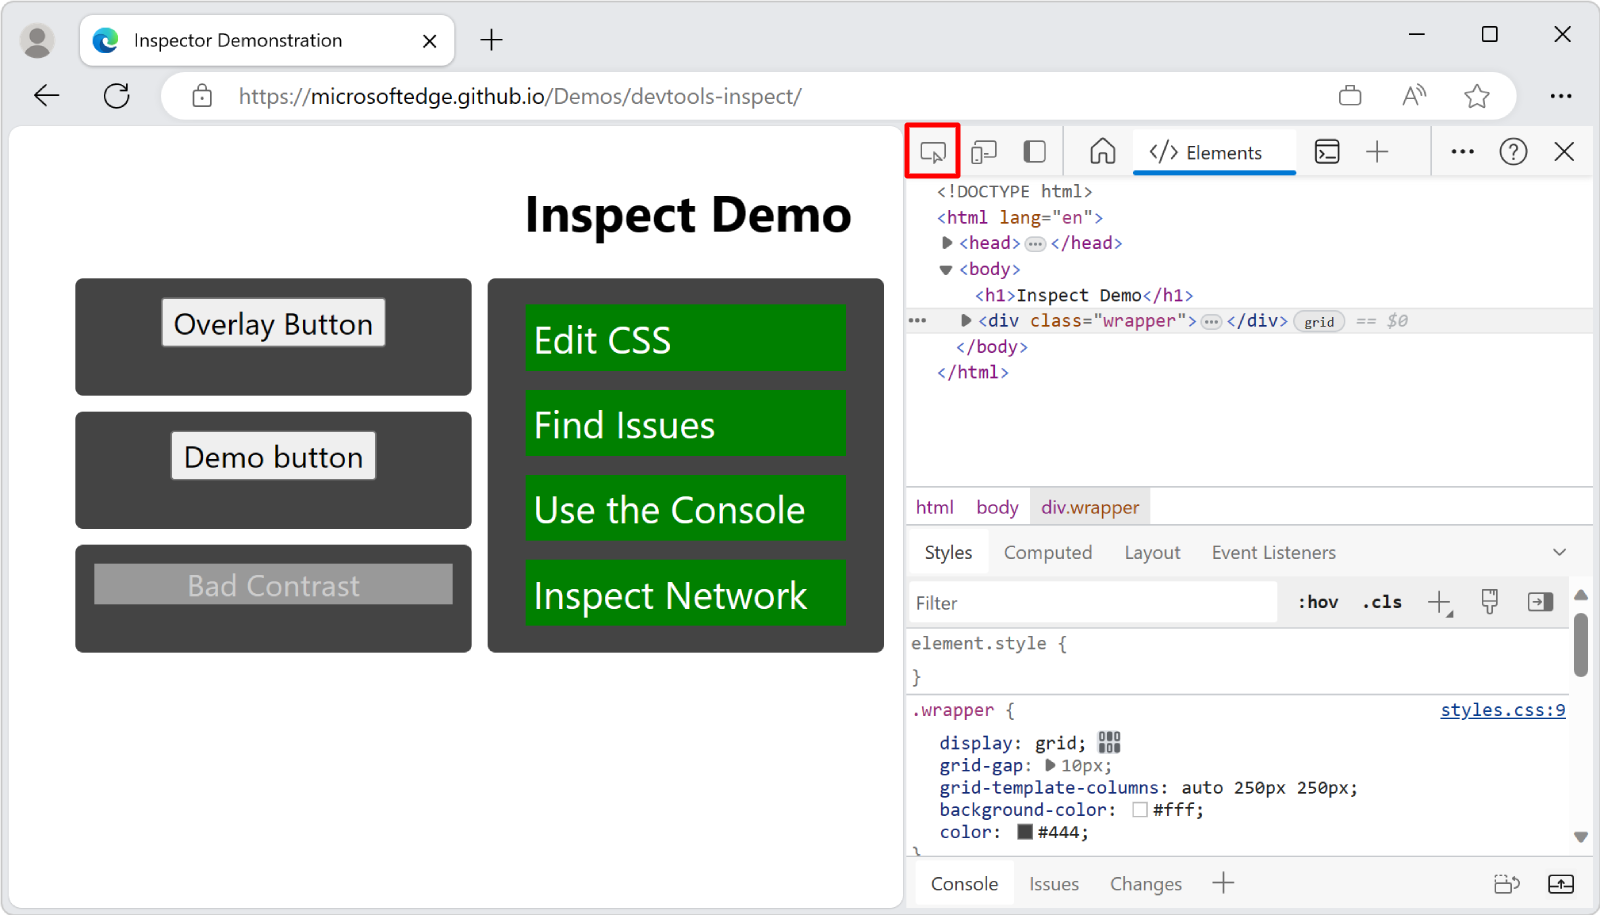 The Inspect tool button in the upper left of DevTools